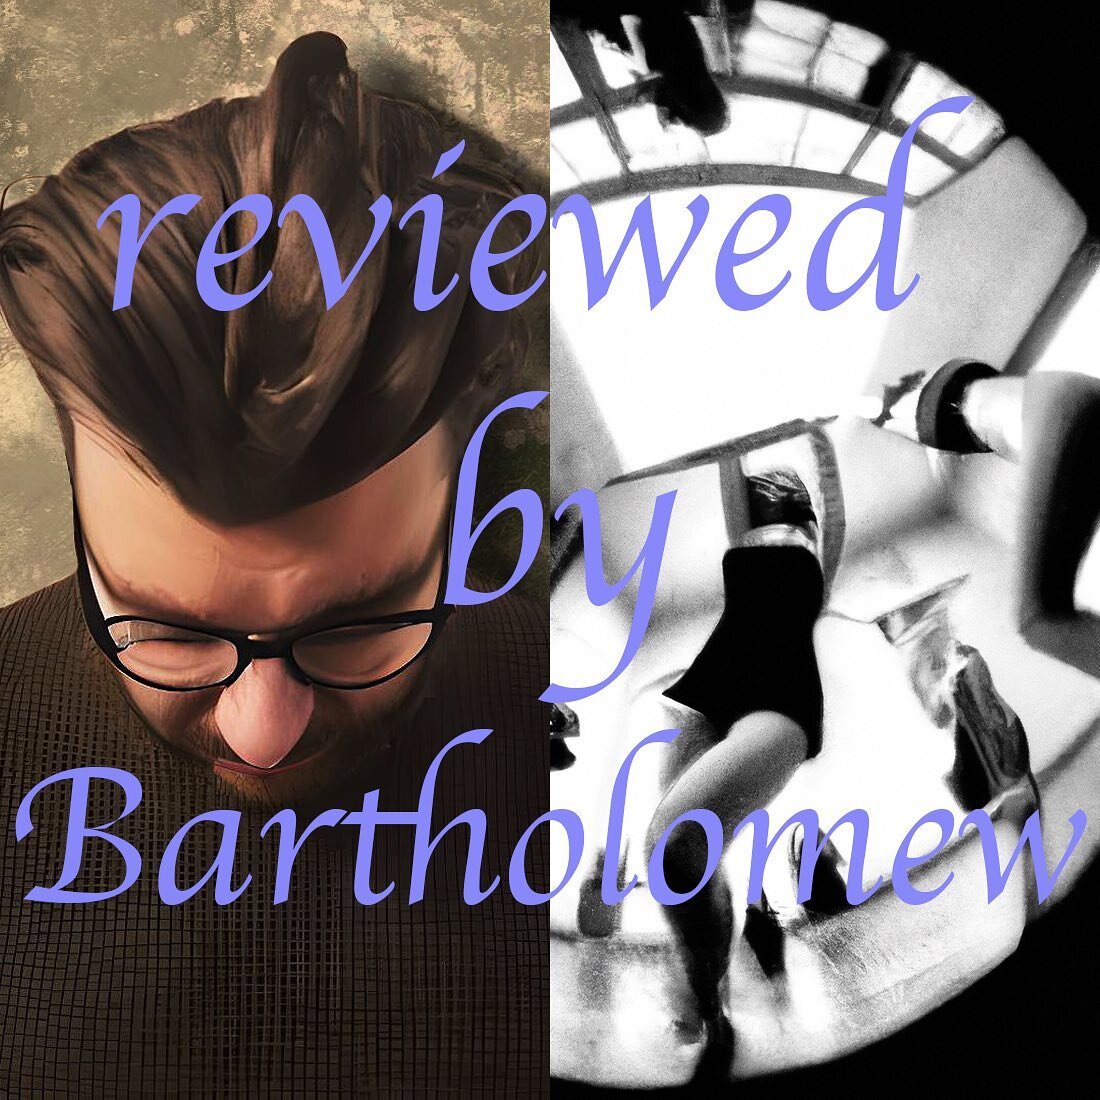 Producers Review Series continues today with the review of FAM by Chris Bartholomew @thebartholomusic💥

Bartholomew is a composer and improviser based in Newcastle UK. Melding chamber instrumentation with generative electronics, his music approaches